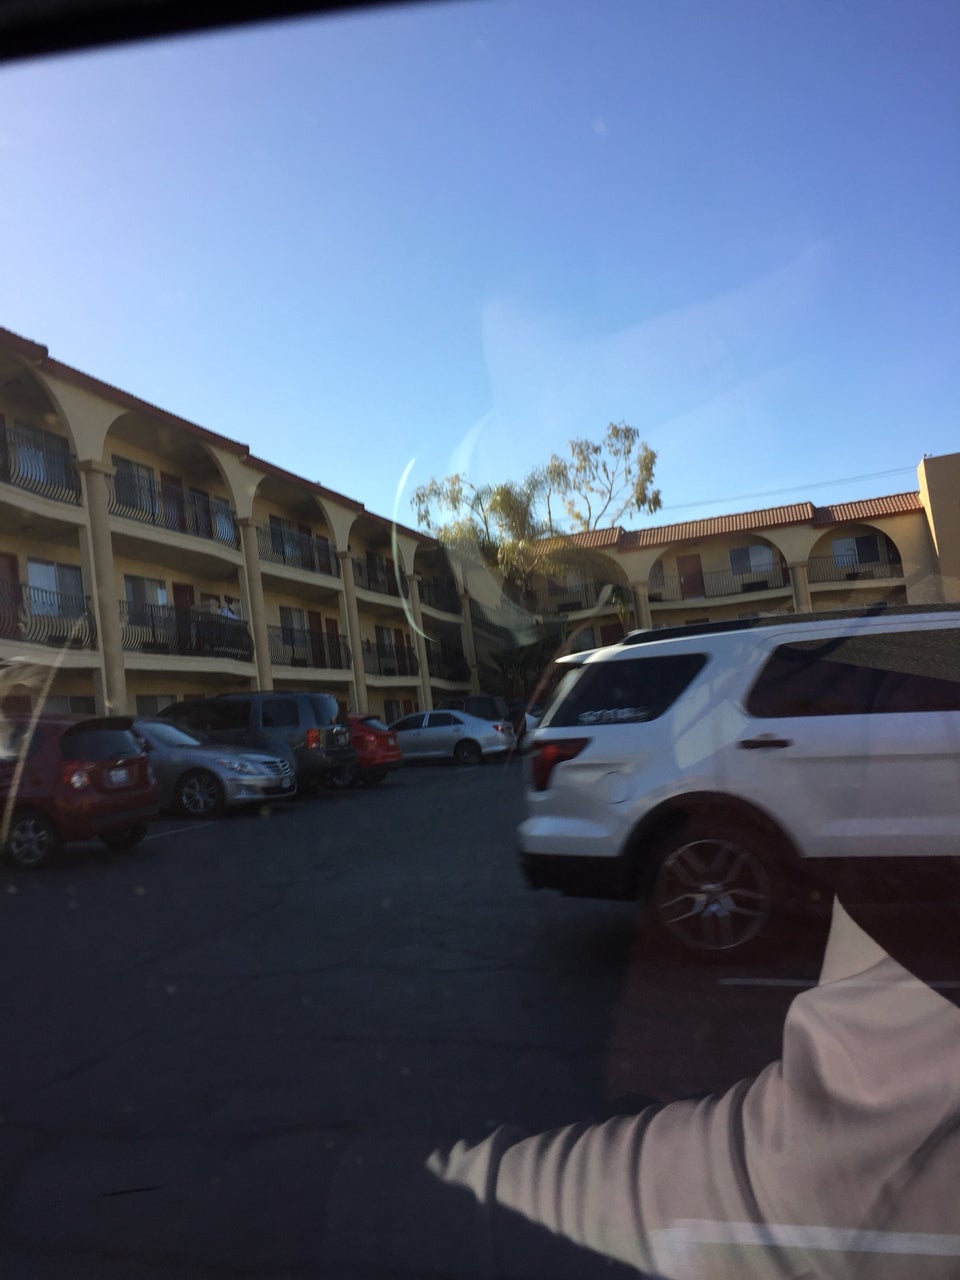 Photo of Best Western Mission Bay